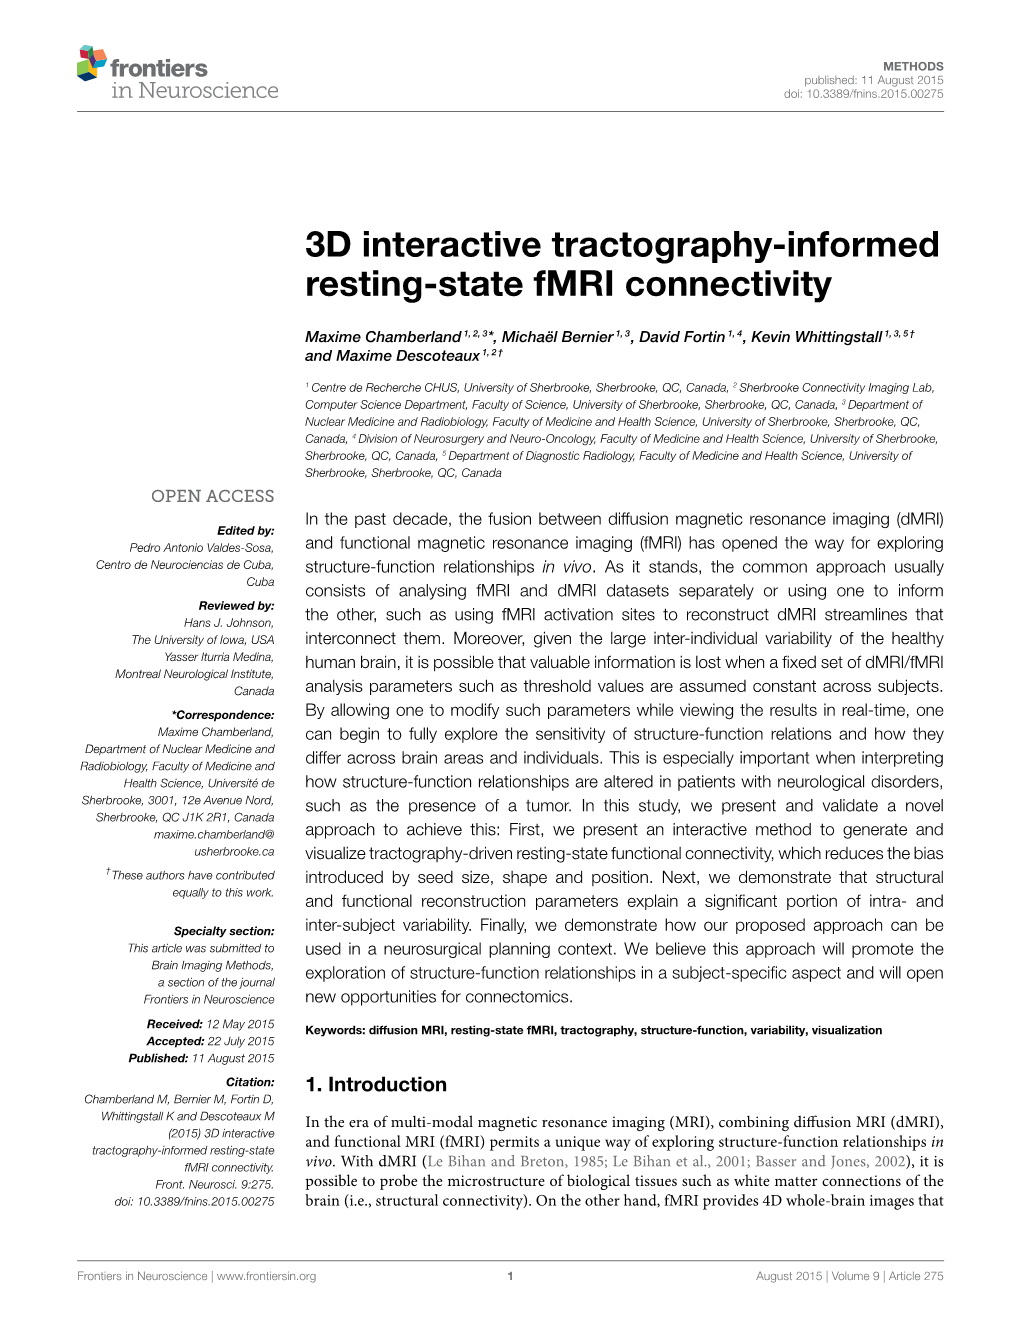 3D Interactive Tractography-Informed Resting-State Fmri Connectivity